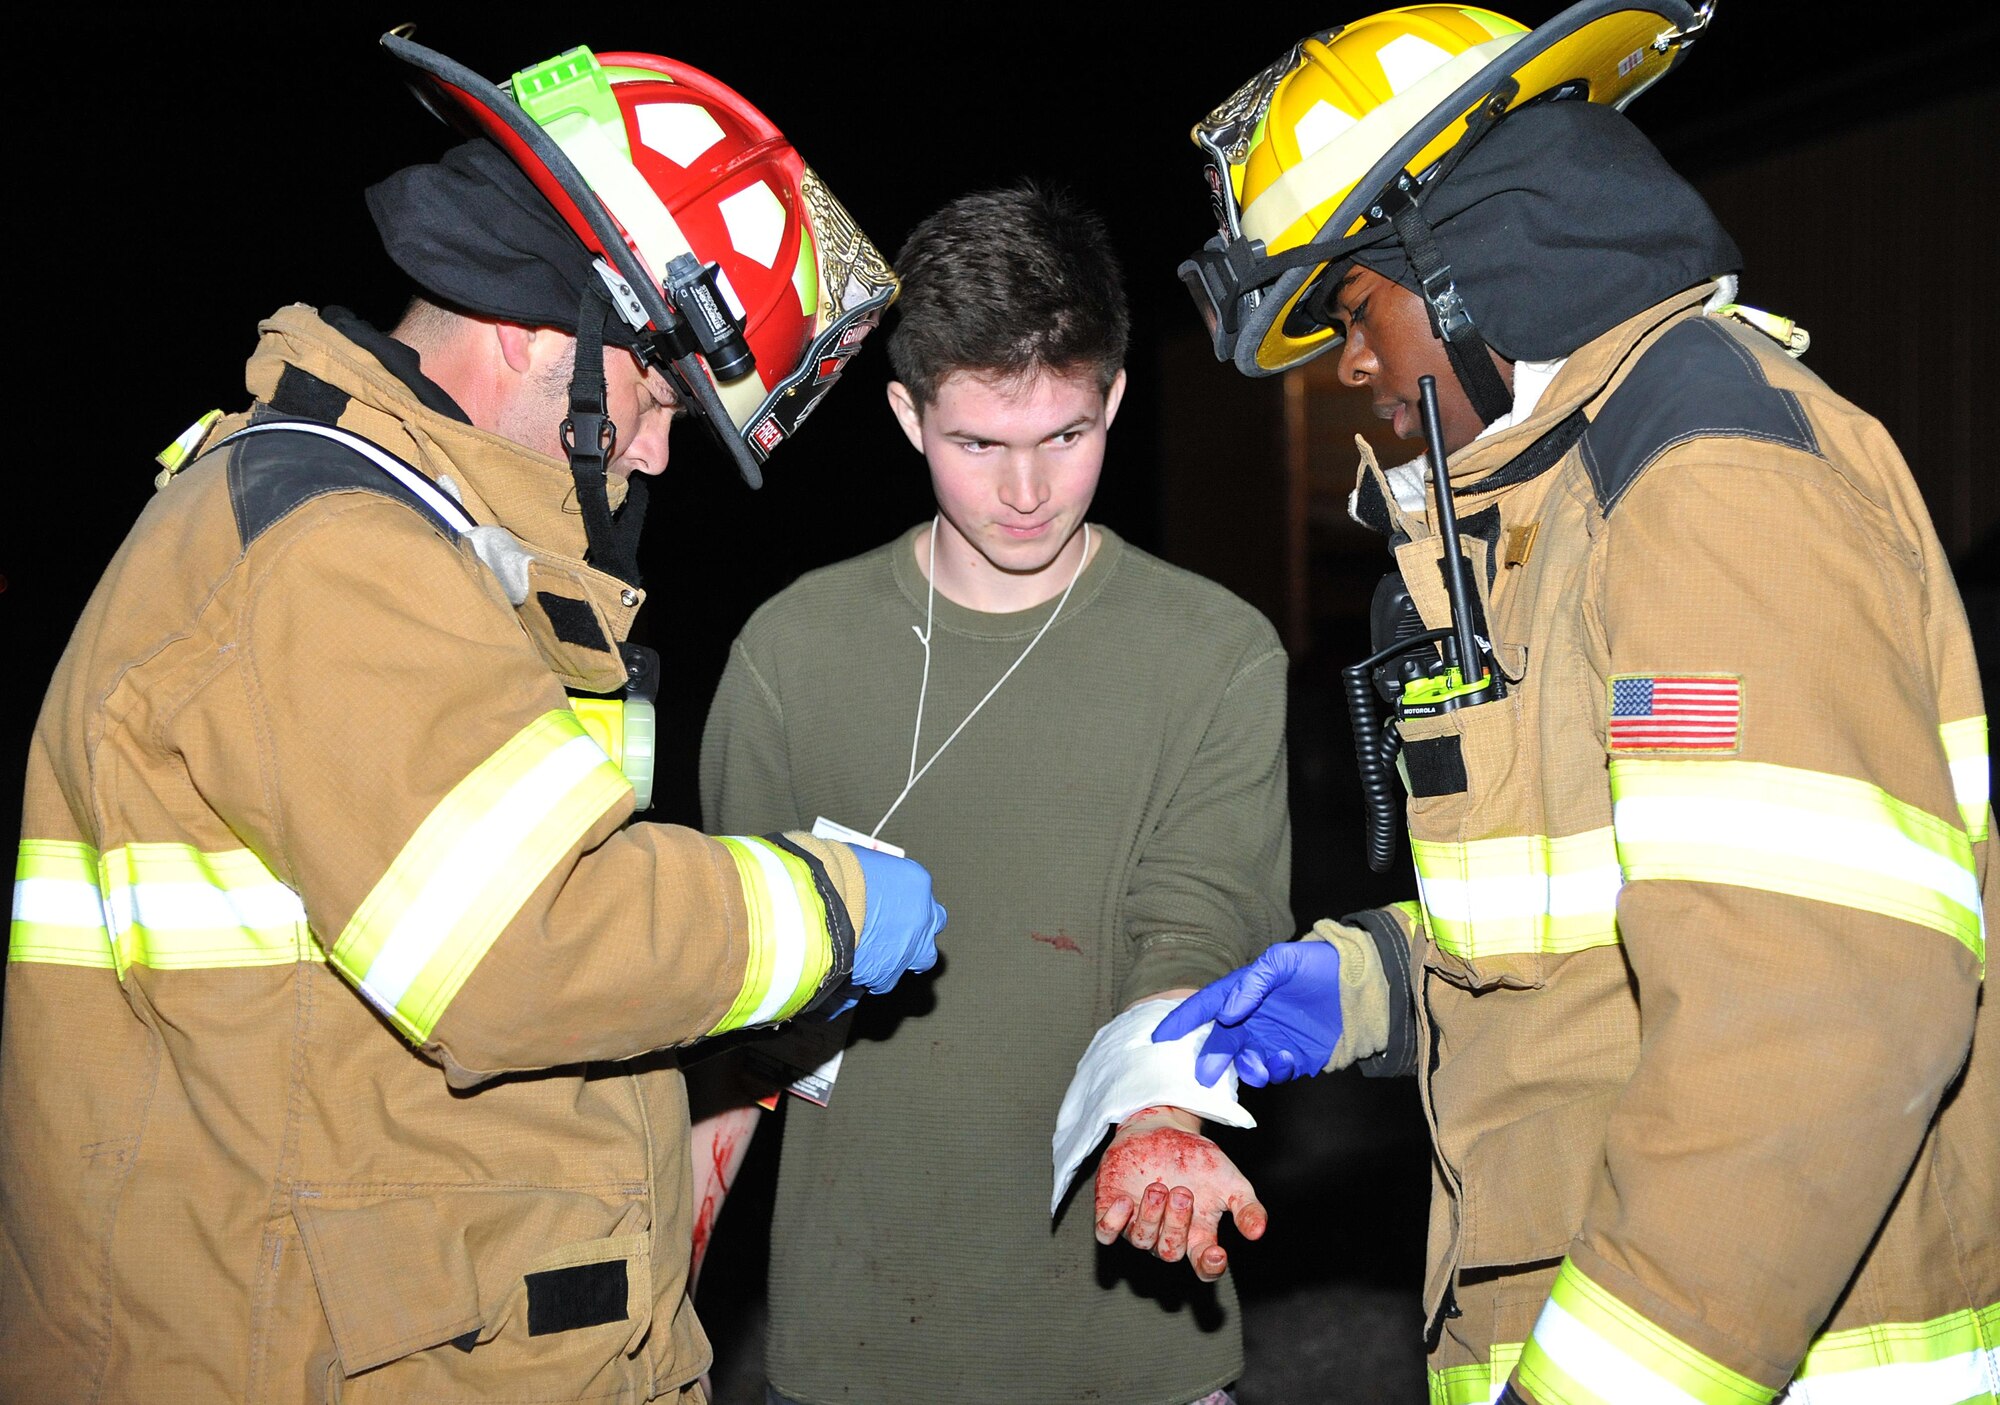 Grand Forks AFB firefighters practice first aid procedures on a simulated plane crash victim during an exercise at the Grand Forks International Airport, N.D., Sept. 21, 2016. Grand Forks AFB firefighters joined area fire depts. and other first responders for a community effort to develop readiness for emergency response. (U.S. Air Force photo by Airman 1st Class Elijaih Tiggs)